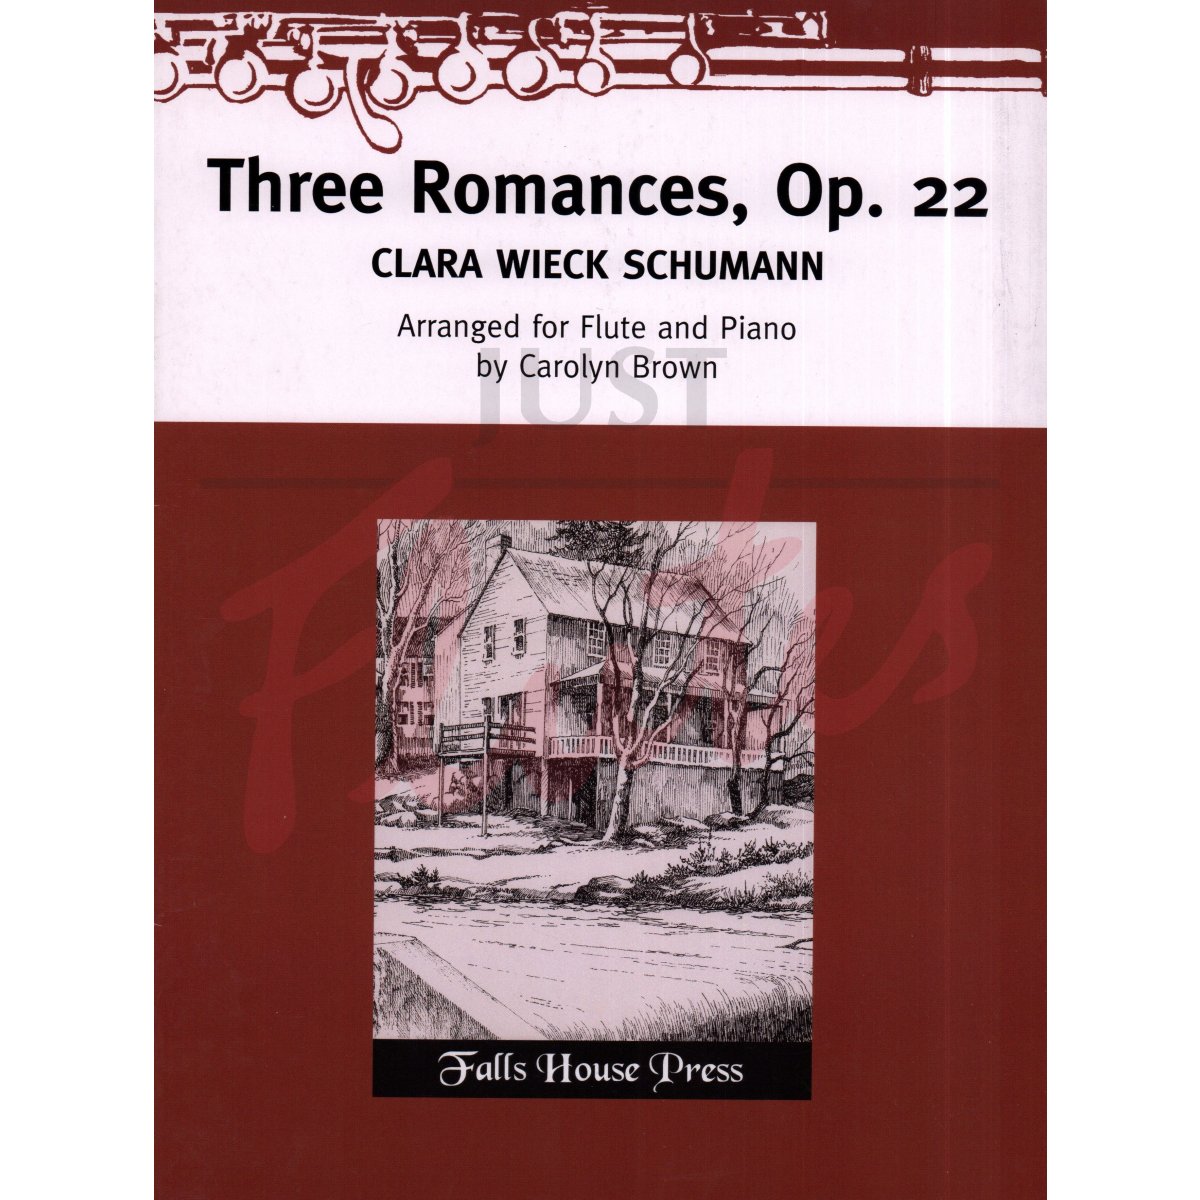 Three Romances for Flute and Piano